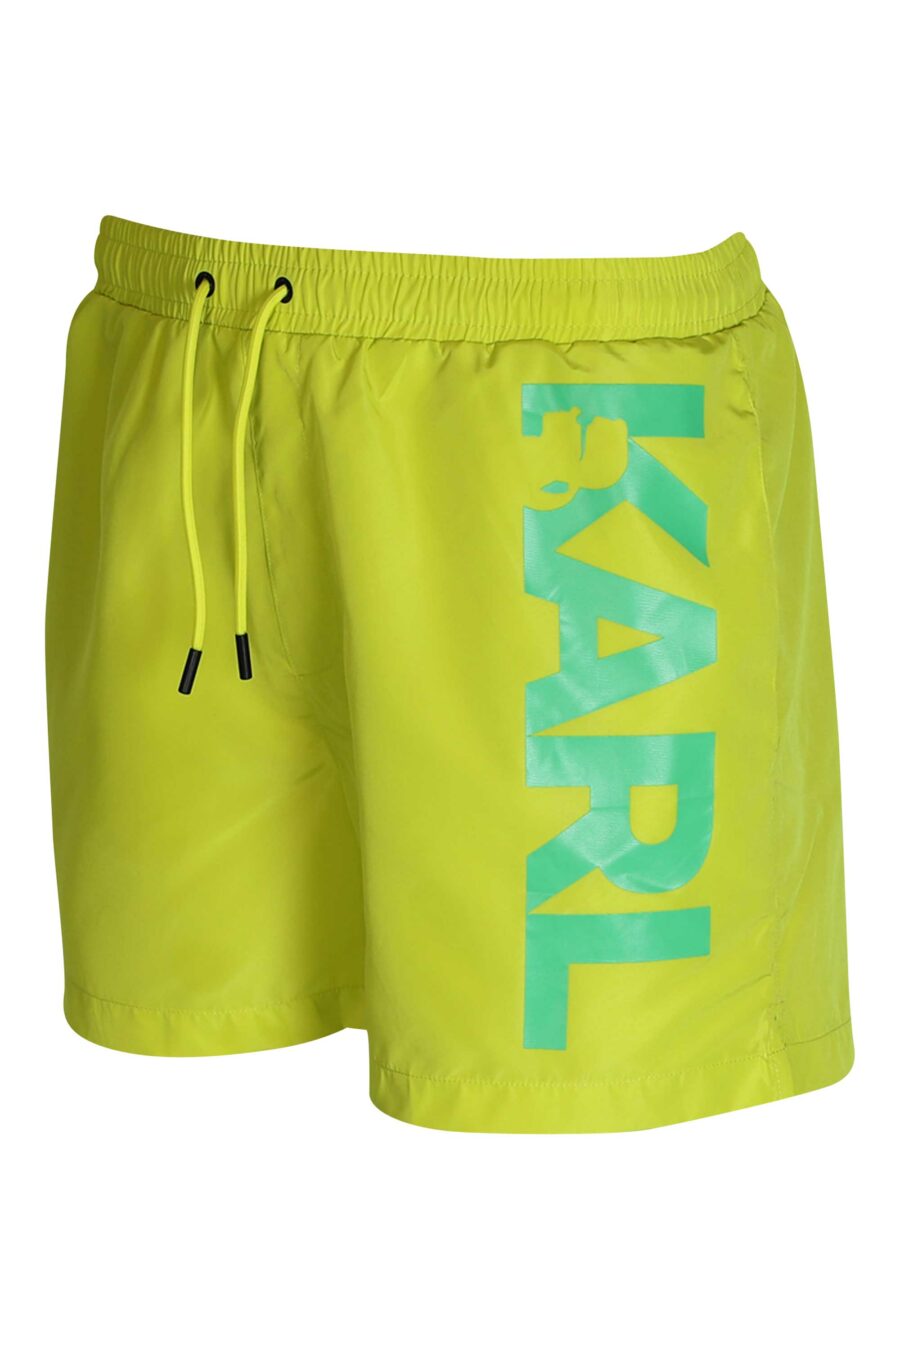 Lime green swimming costume with green side logo - 8720744217916 2